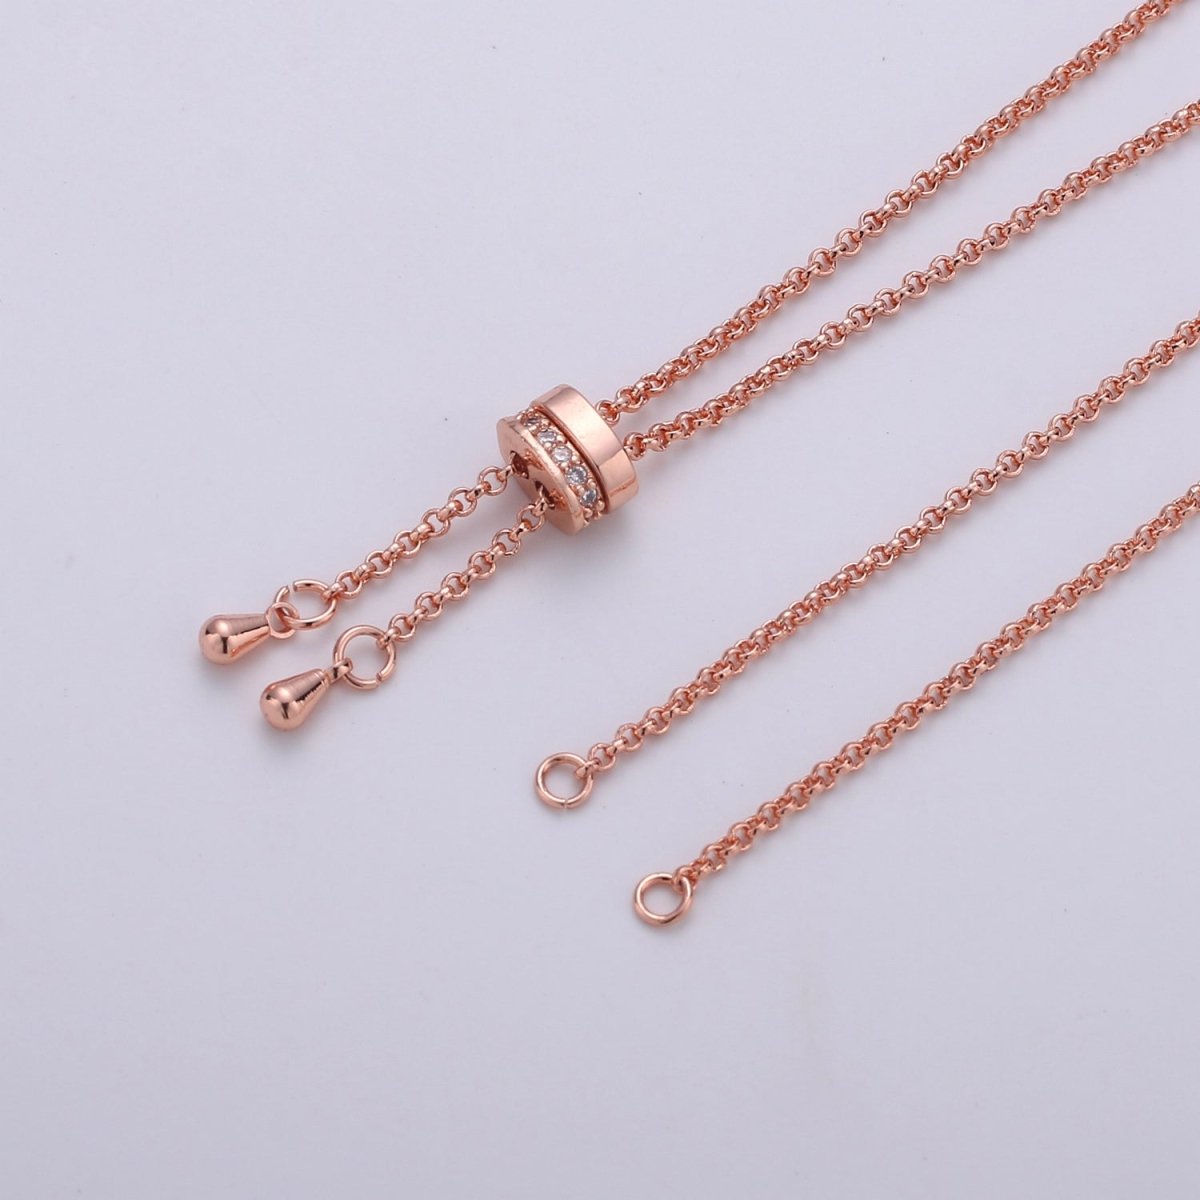 14k Gold Filled Adjustable Necklace Half finished Chain Necklace with rubber stopper Rose Gold, Silver, Black Rolo Chain Wholesale 1pc/10pcs K-520 - K-523 - DLUXCA